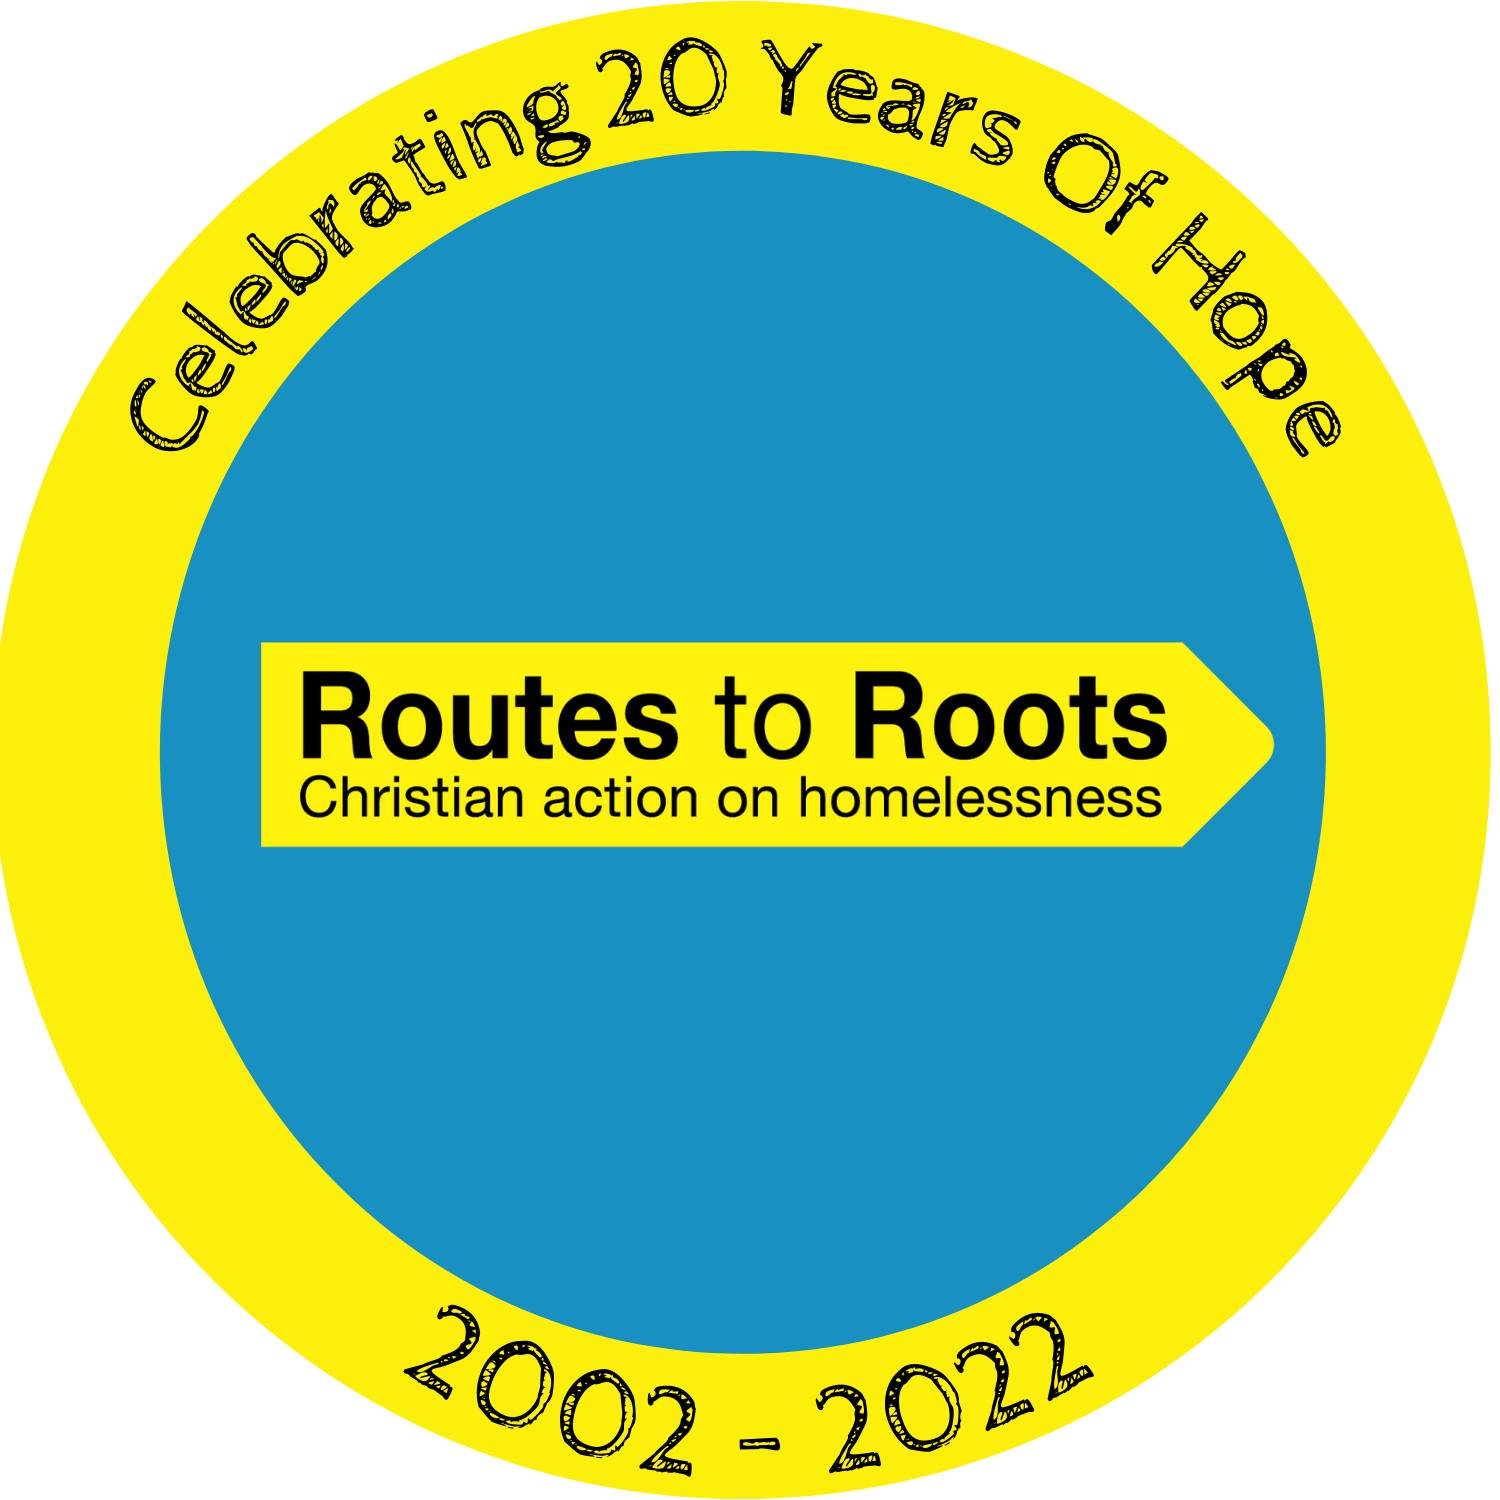 Routes to Roots receives The Queen’s Award for Voluntary Service